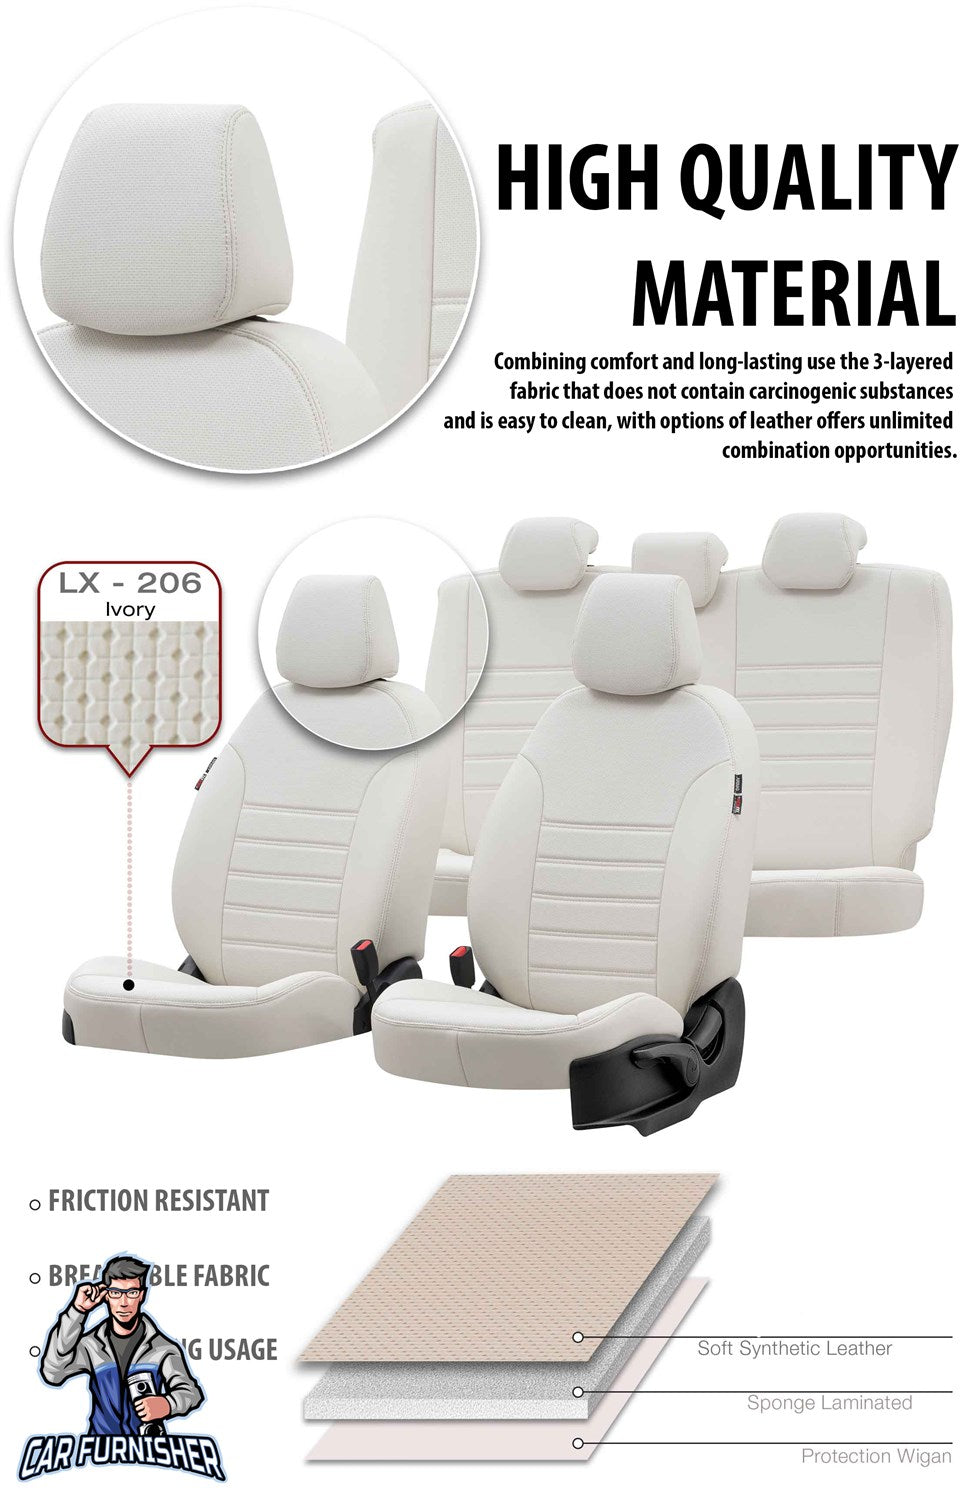 Fiat Linea Seat Covers New York Leather Design Beige Leather